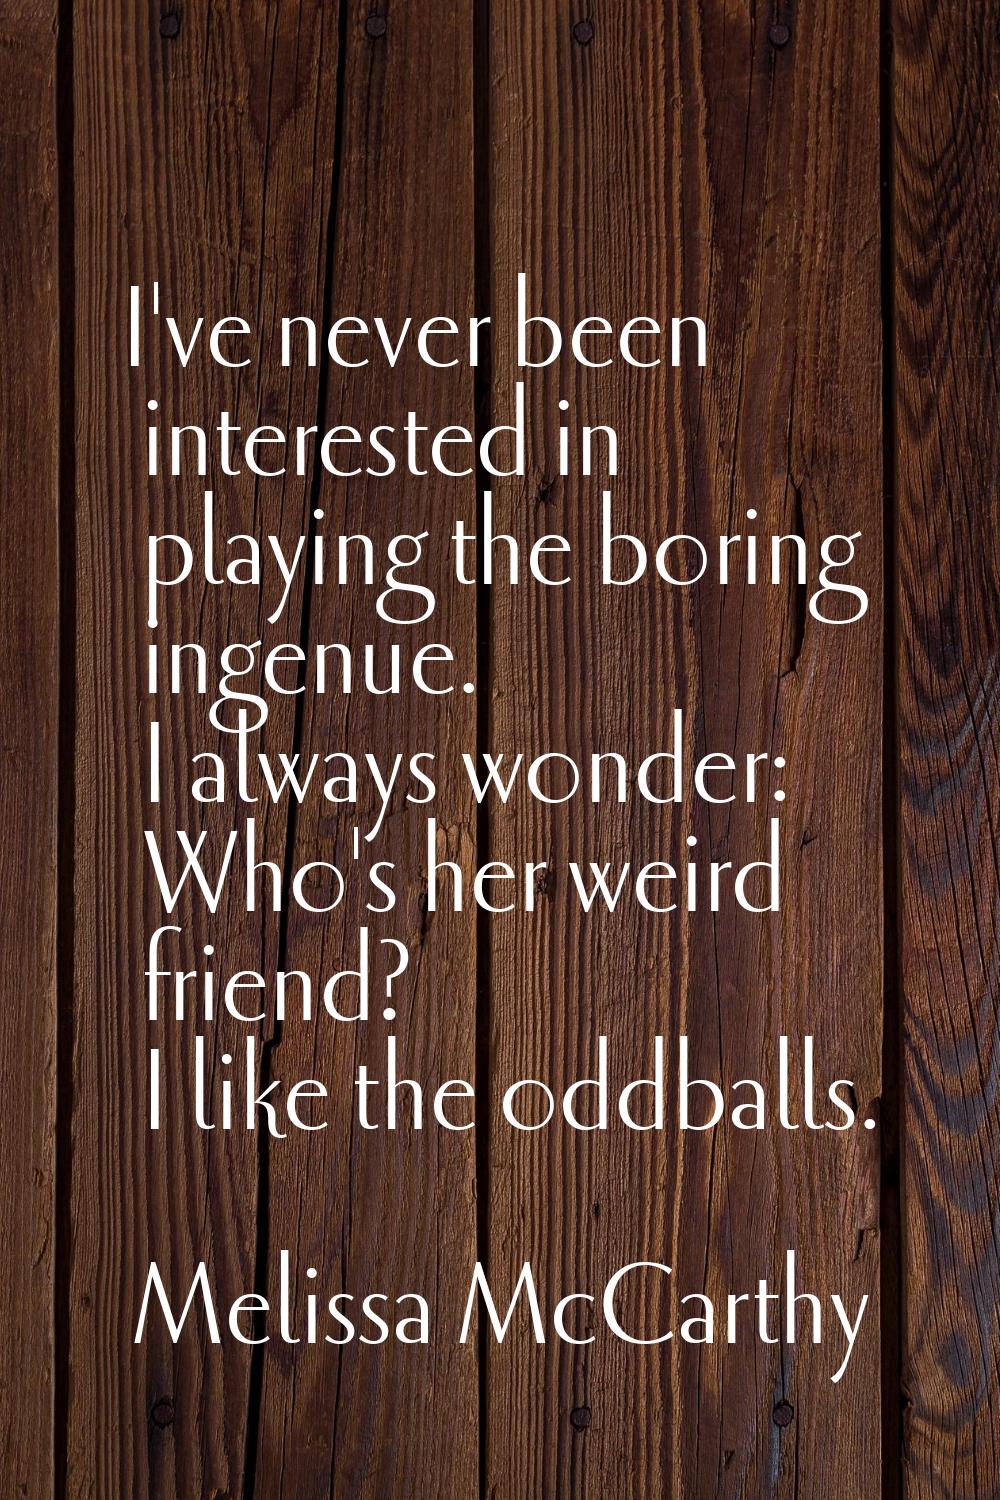 I've never been interested in playing the boring ingenue. I always wonder: Who's her weird friend? 